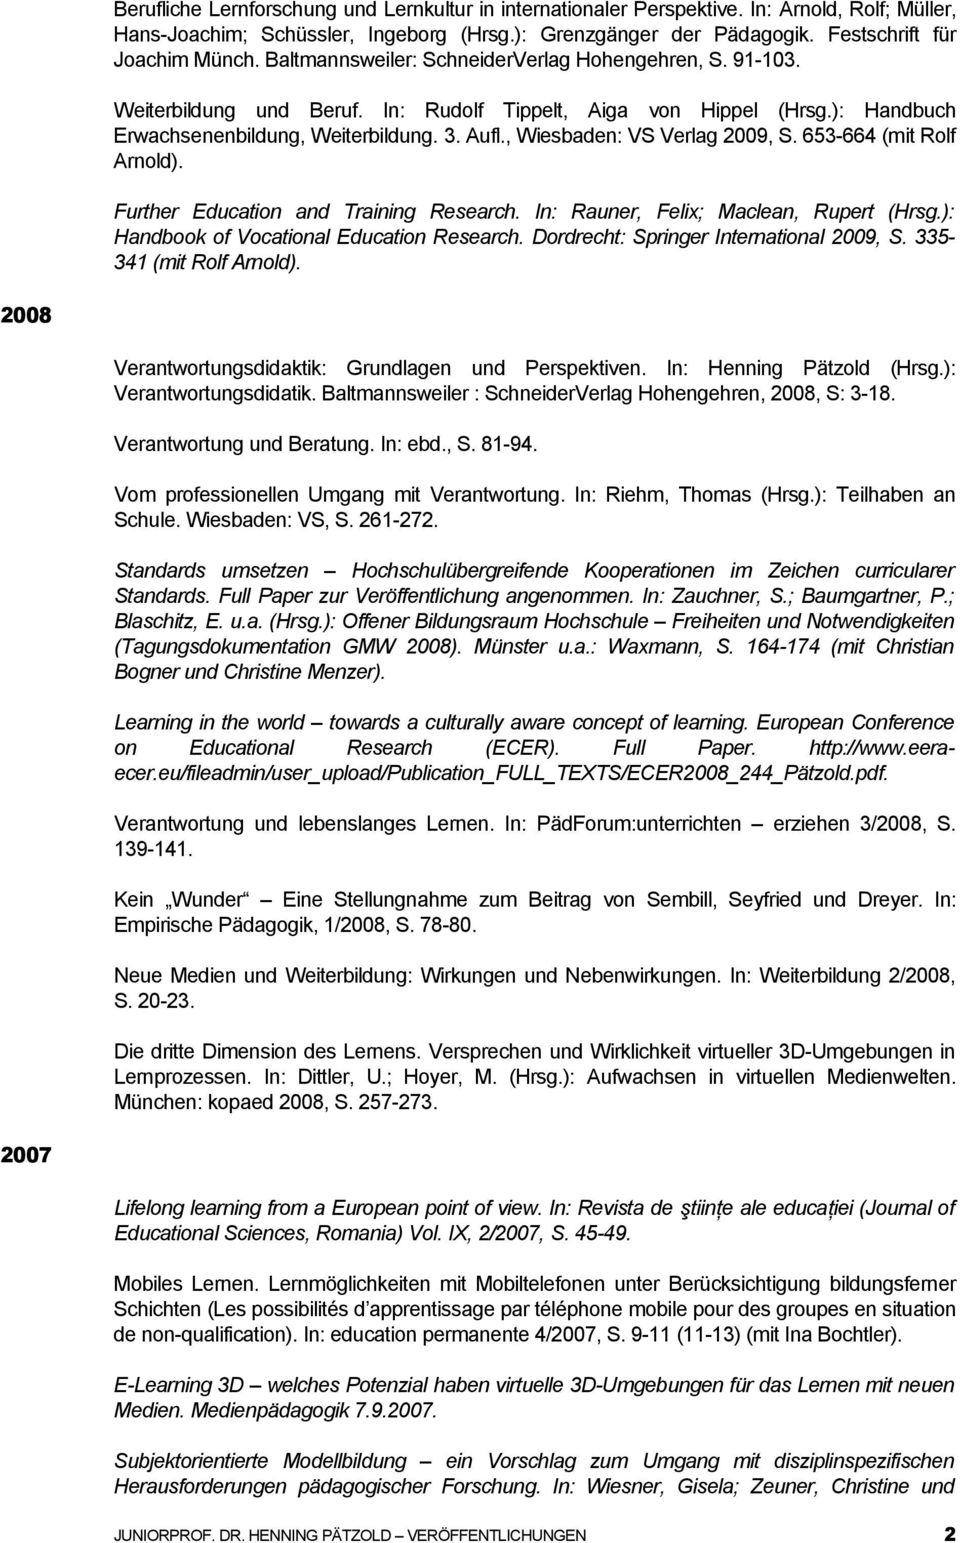 , Wiesbaden: VS Verlag 2009, S. 653-664 (mit Rolf Arnold). Further Education and Training Research. In: Rauner, Felix; Maclean, Rupert (Hrsg.): Handbook of Vocational Education Research.